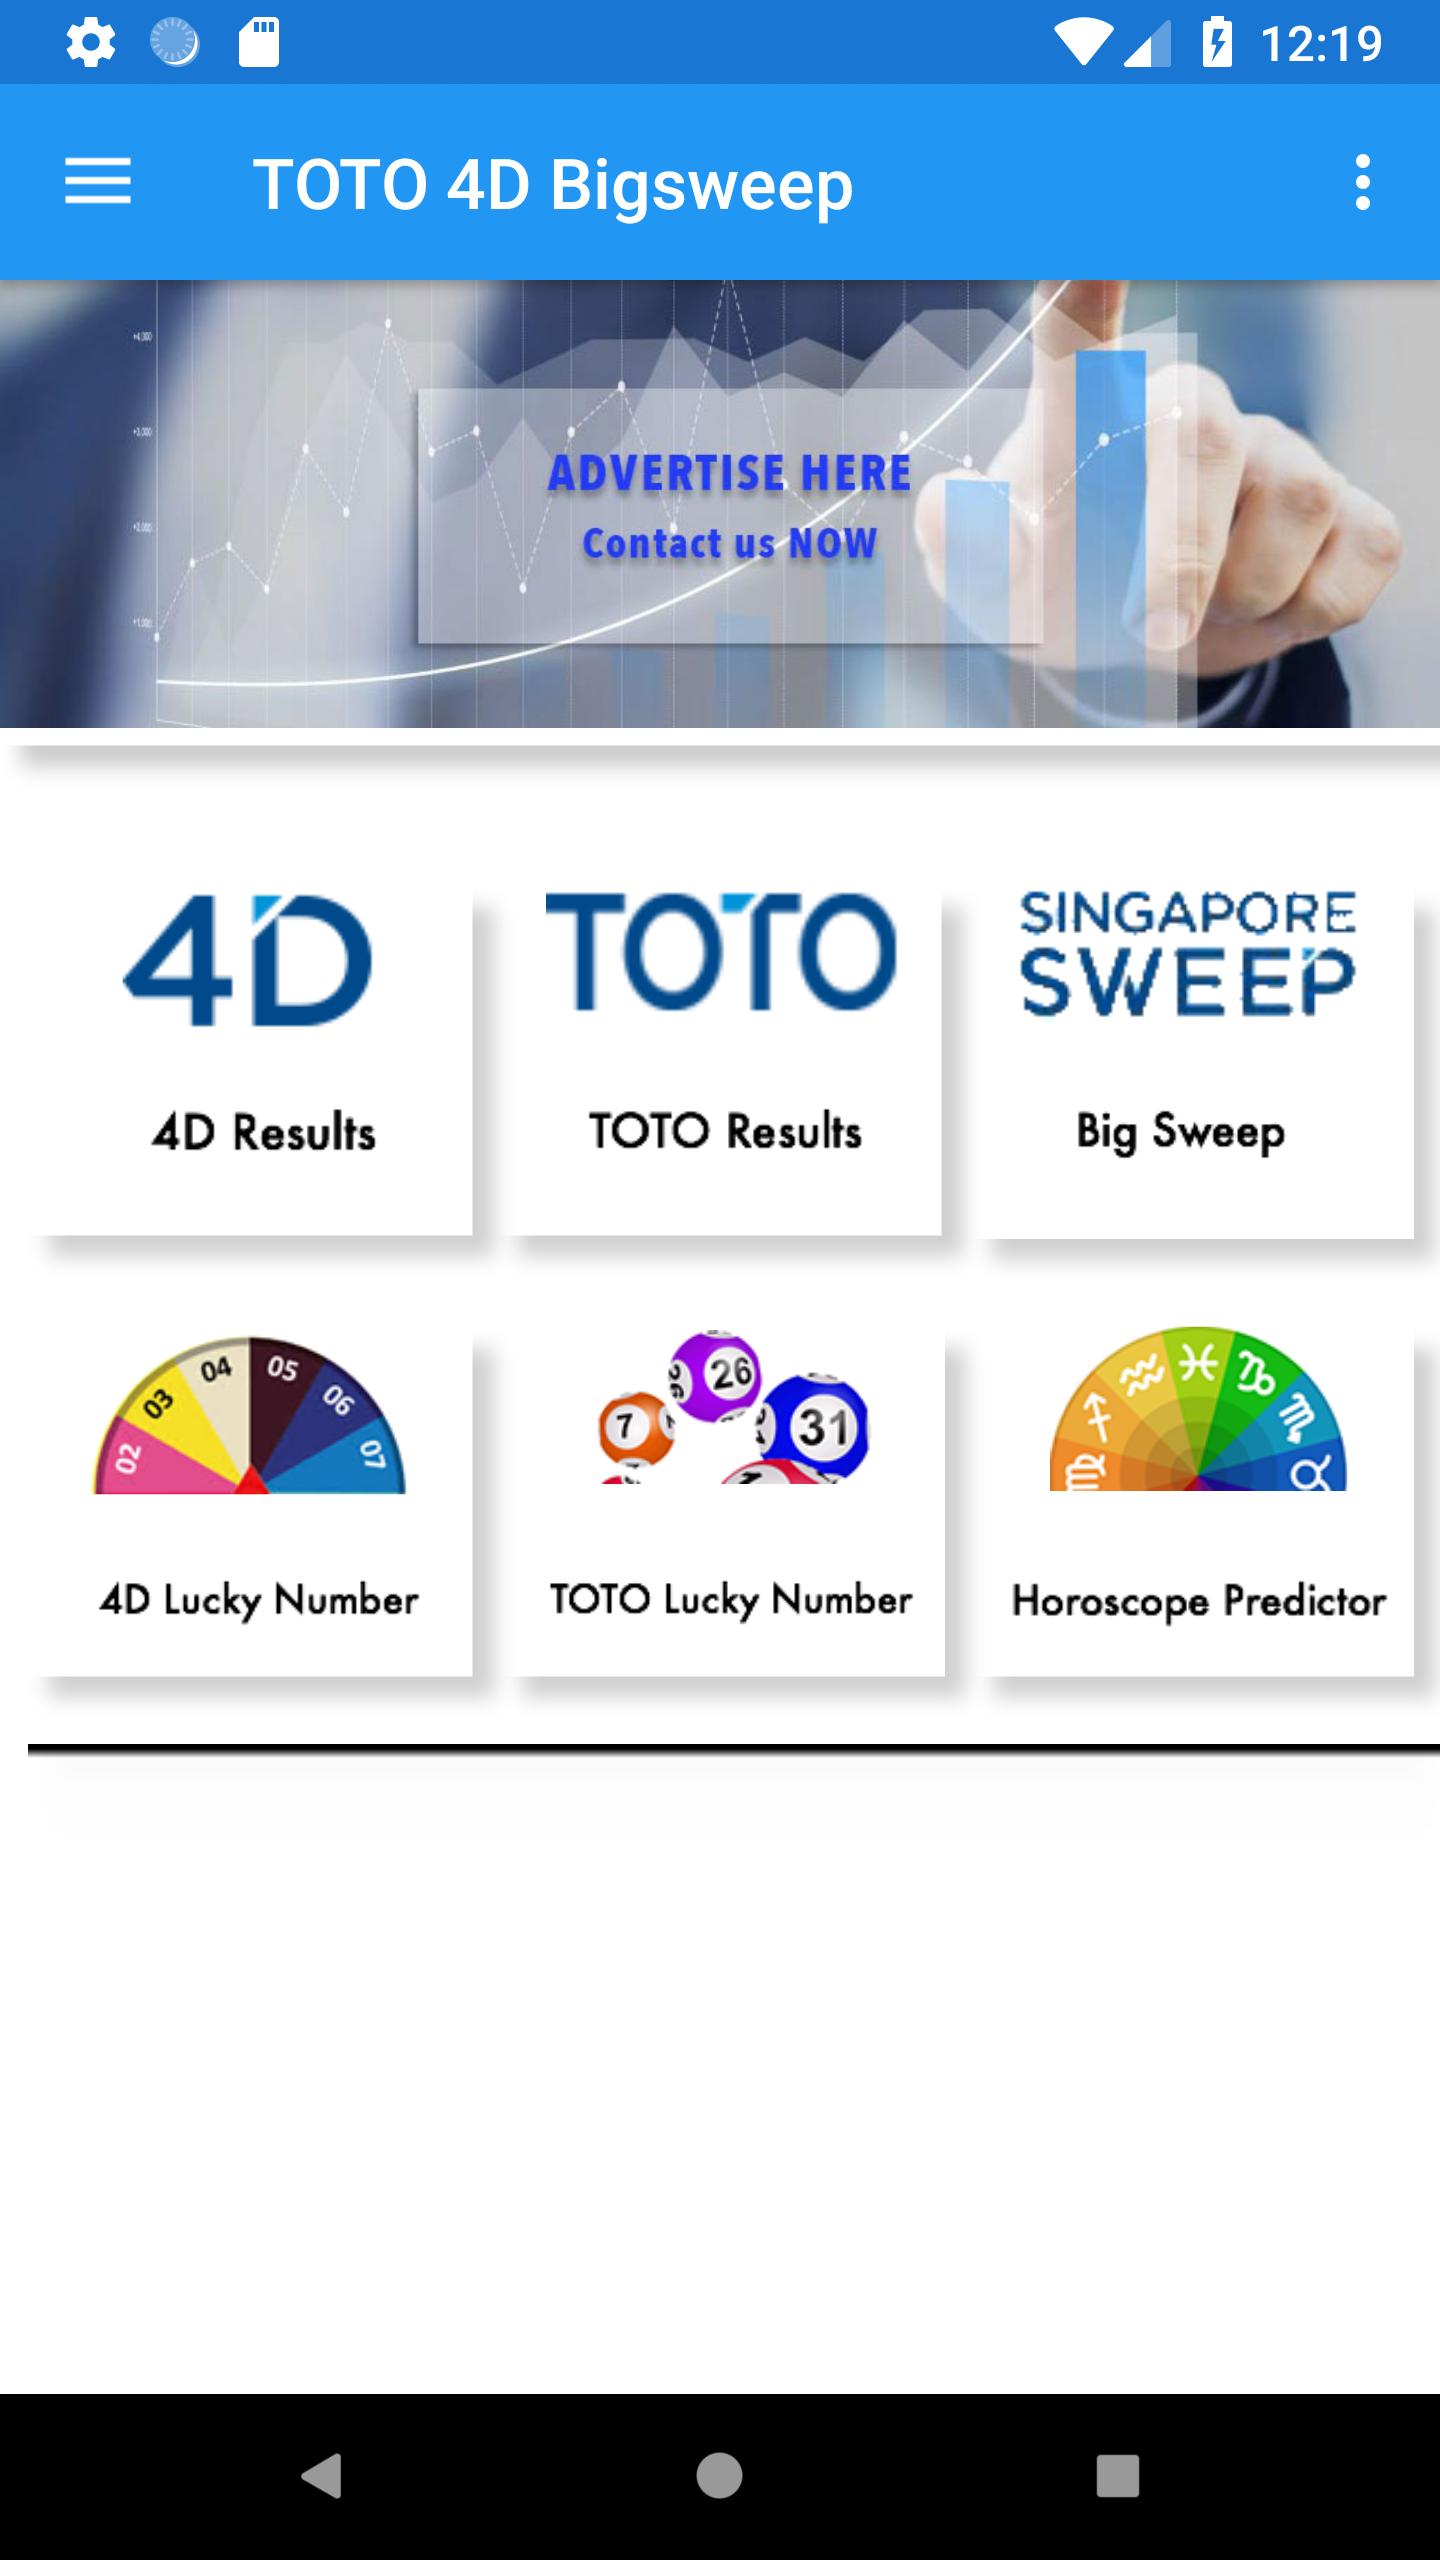 Results 4d singapore GD Lotto